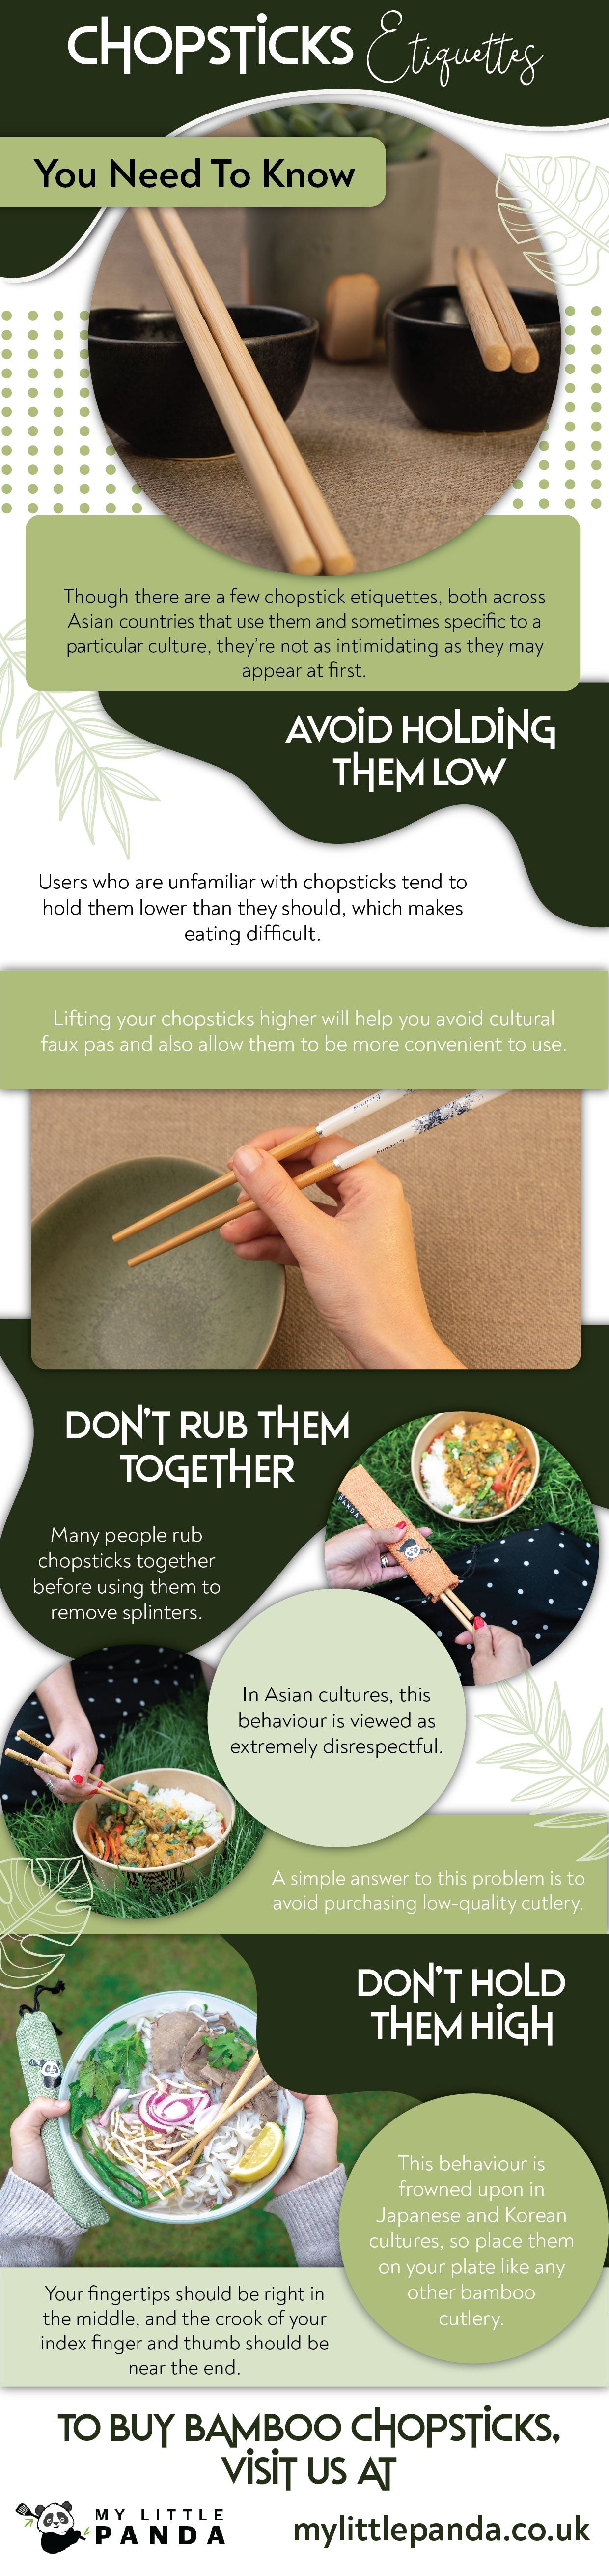 Chopsticks Etiquette You Need to Know - Infograph